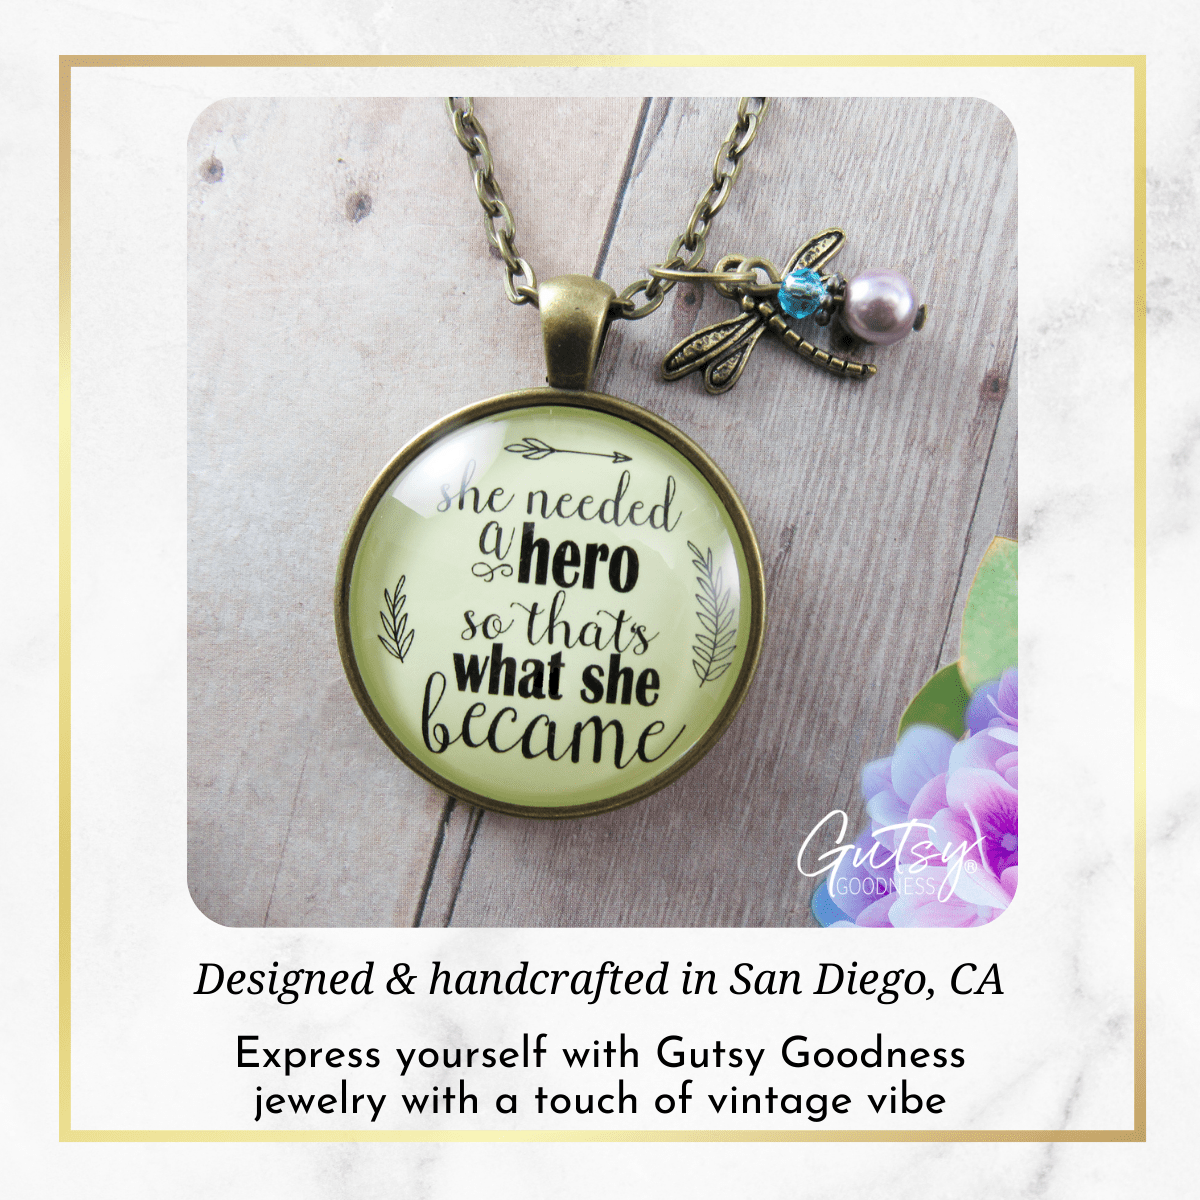 Gutsy Goodness Dragonfly Necklace She Needed a Hero Everyday Quote Jewelry - Gutsy Goodness Handmade Jewelry;Dragonfly Necklace She Needed A Hero Everyday Quote Jewelry - Gutsy Goodness Handmade Jewelry Gifts